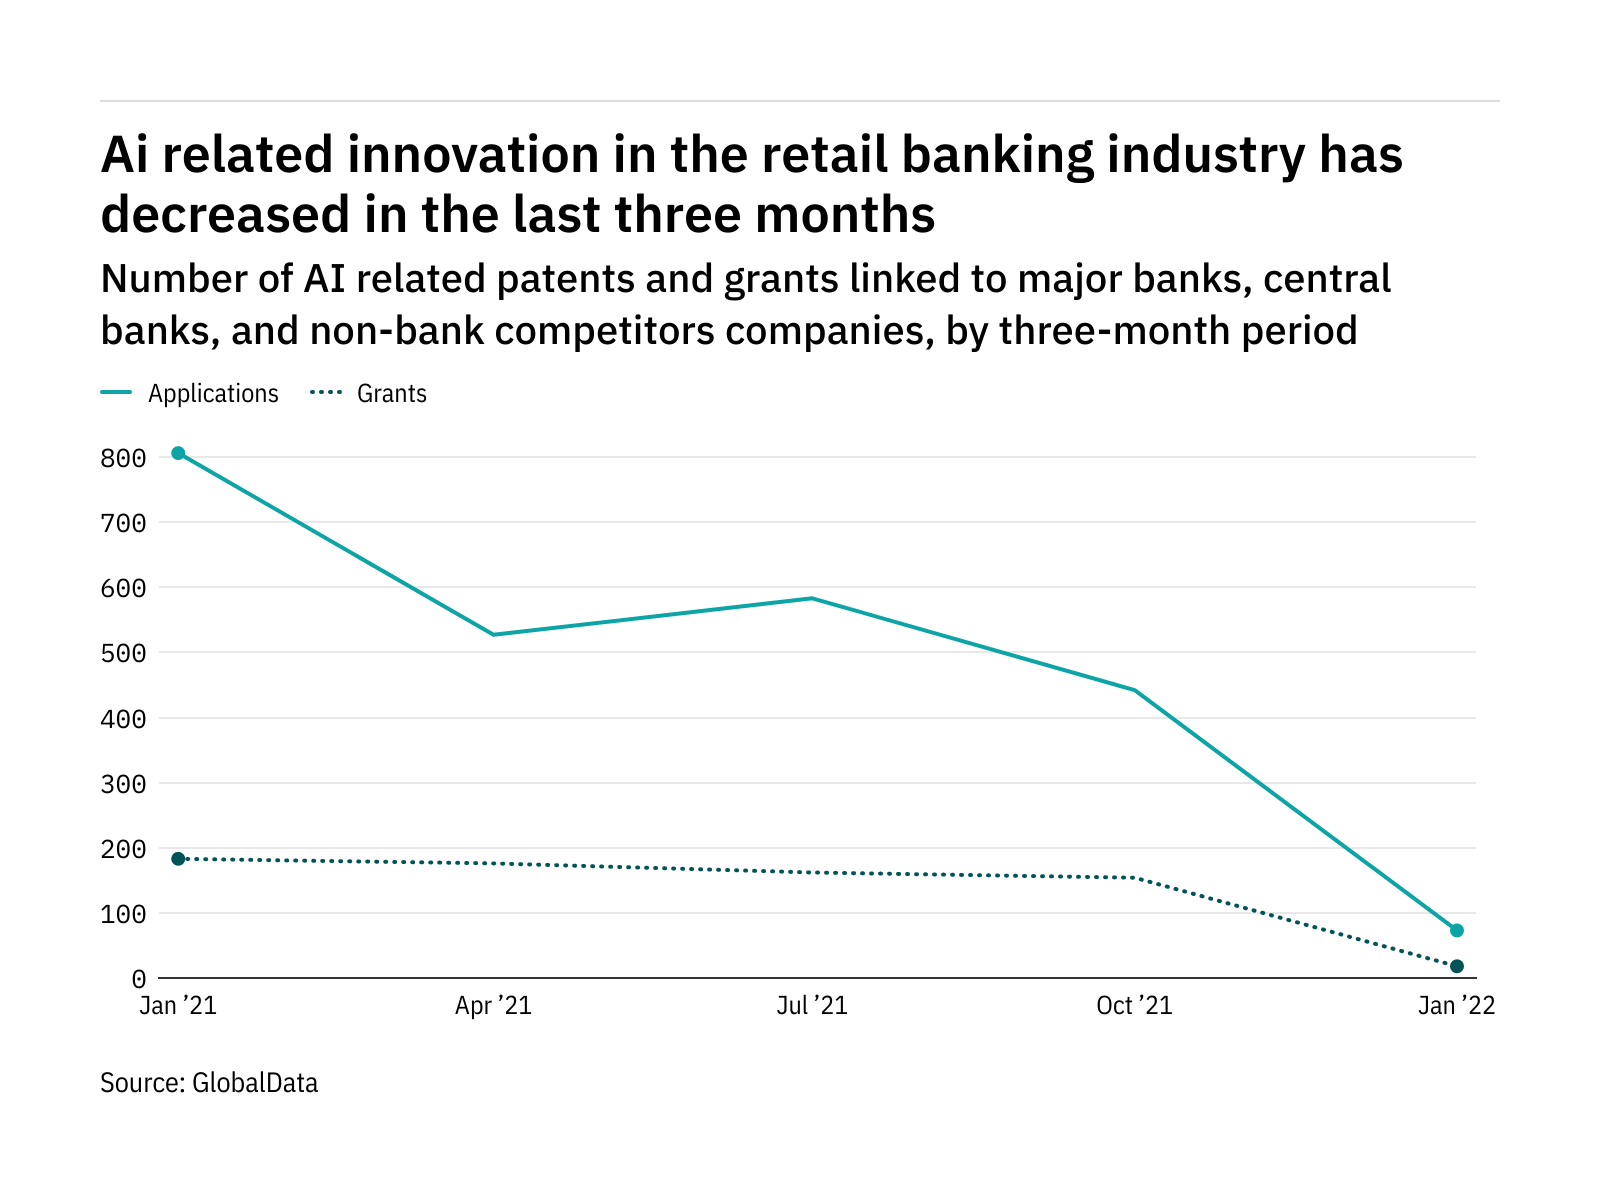 Artificial intelligence innovation among retail banking industry companies has dropped off in the last year